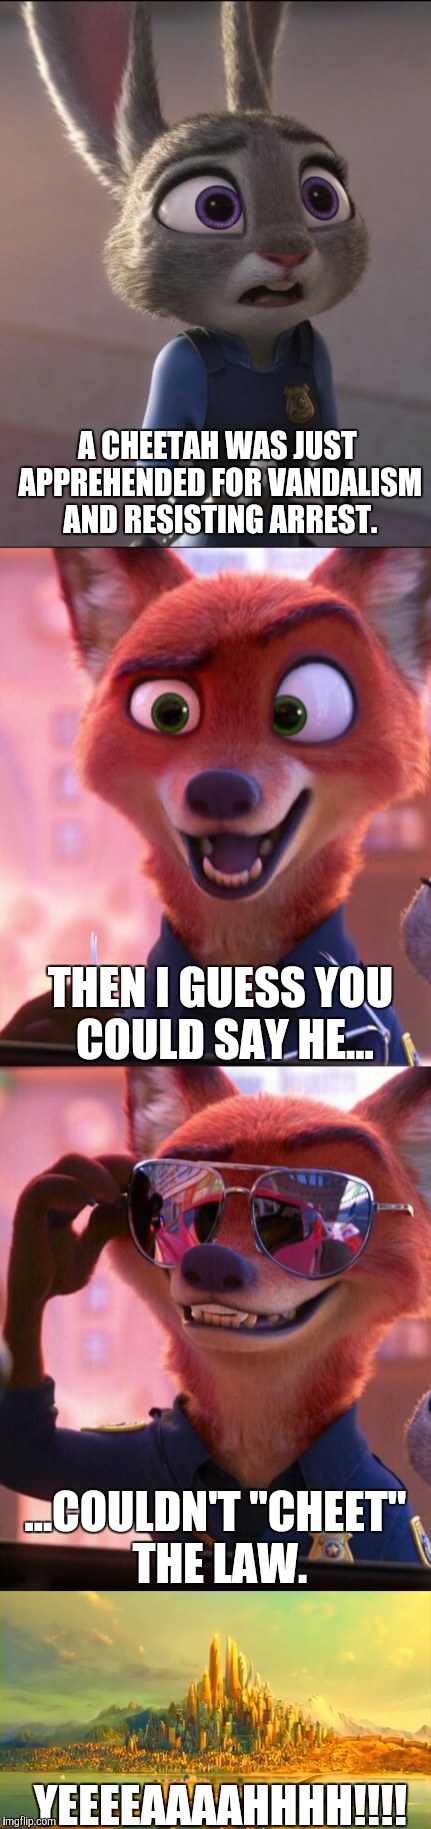 CSI: Zootopia 10 | A CHEETAH WAS JUST APPREHENDED FOR VANDALISM AND RESISTING ARREST. THEN I GUESS YOU COULD SAY HE... ...COULDN'T "CHEET" THE LAW. YEEEEAAAAHHHH!!!! | image tagged in zootopia,judy hopps,nick wilde,parody,funny,memes | made w/ Imgflip meme maker